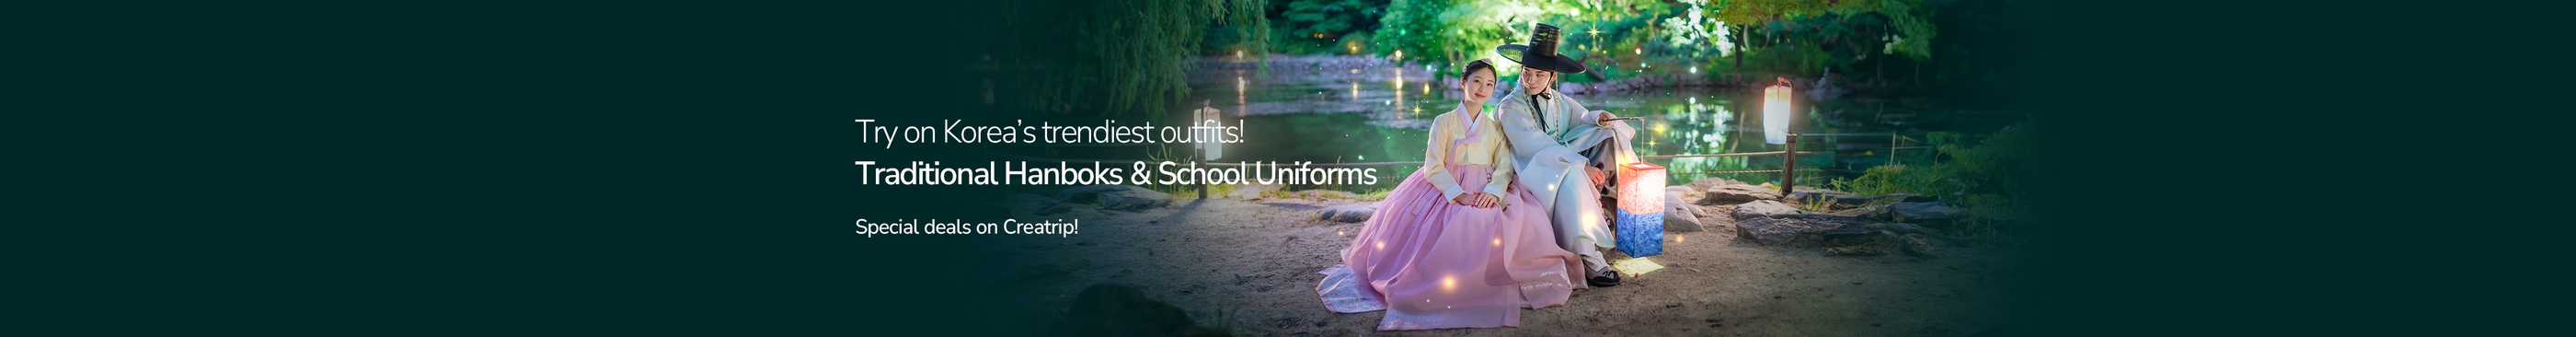 Try on Korea’s trendiest outfits! Traditional Hanboks & School Uniforms